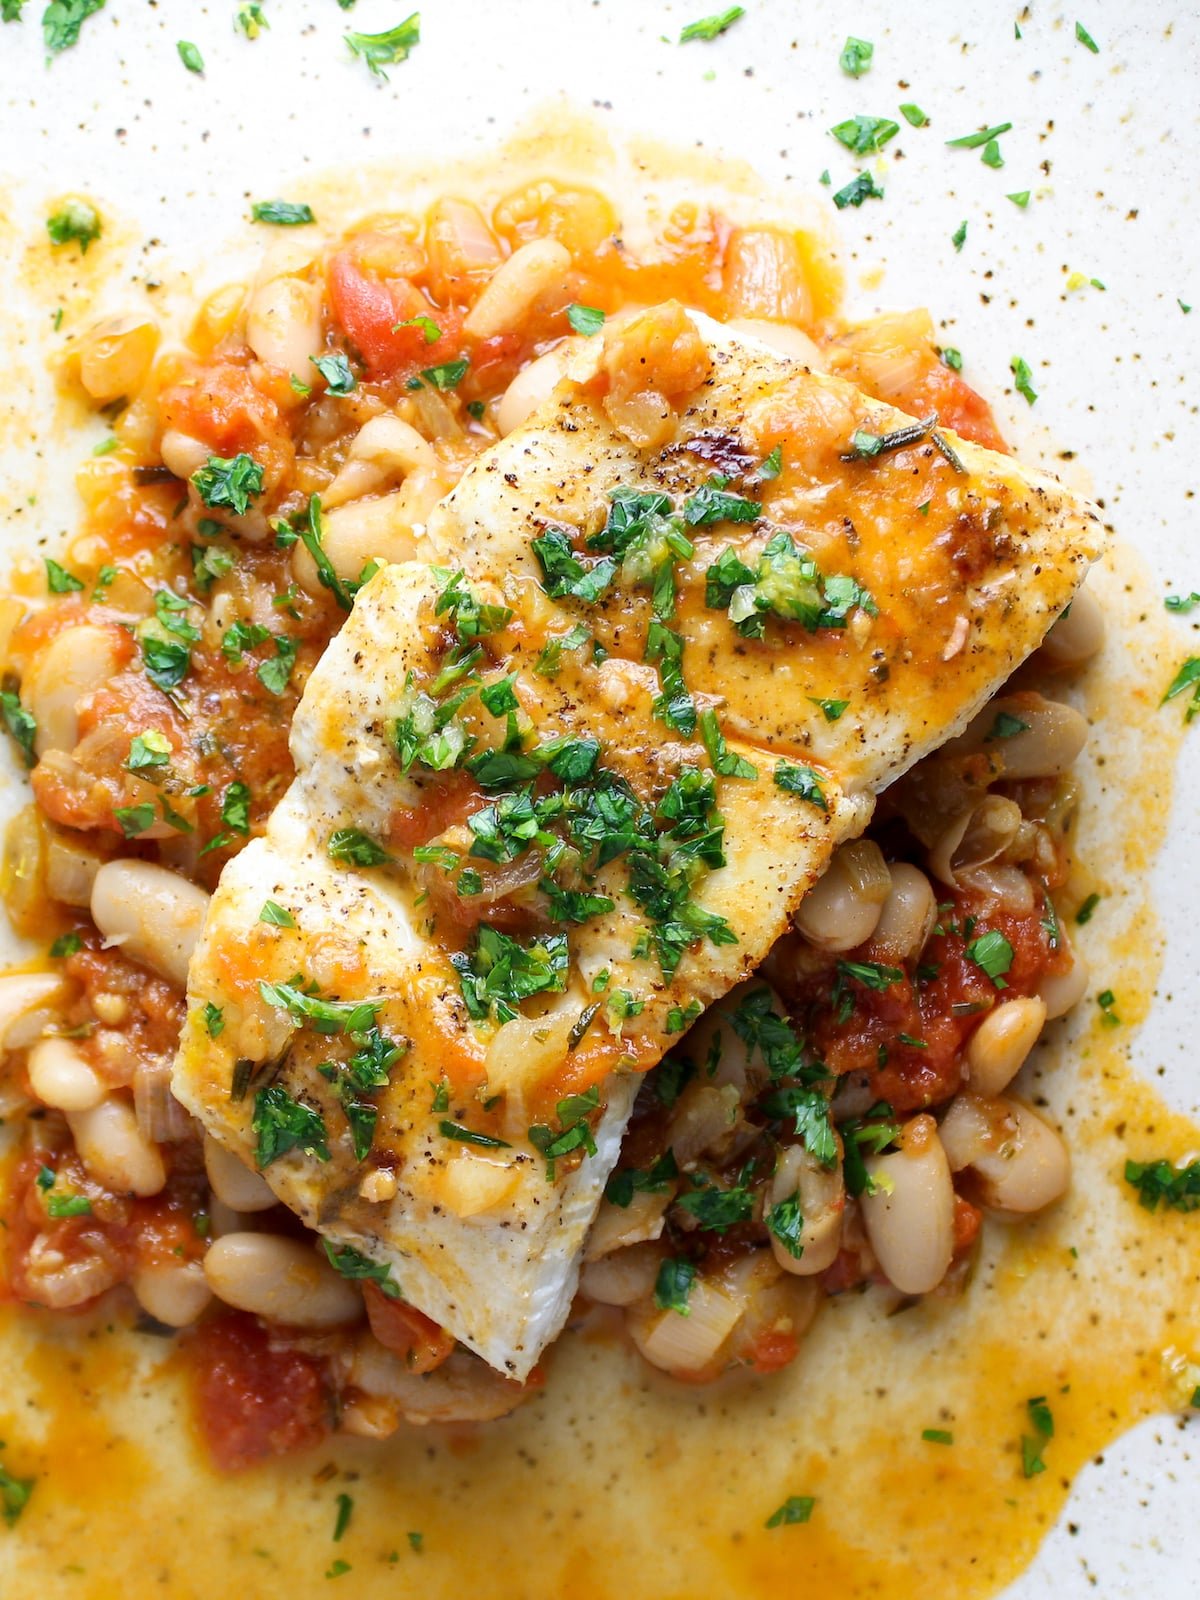 Cooked halibut on a plate with sautéed cannellini beans.